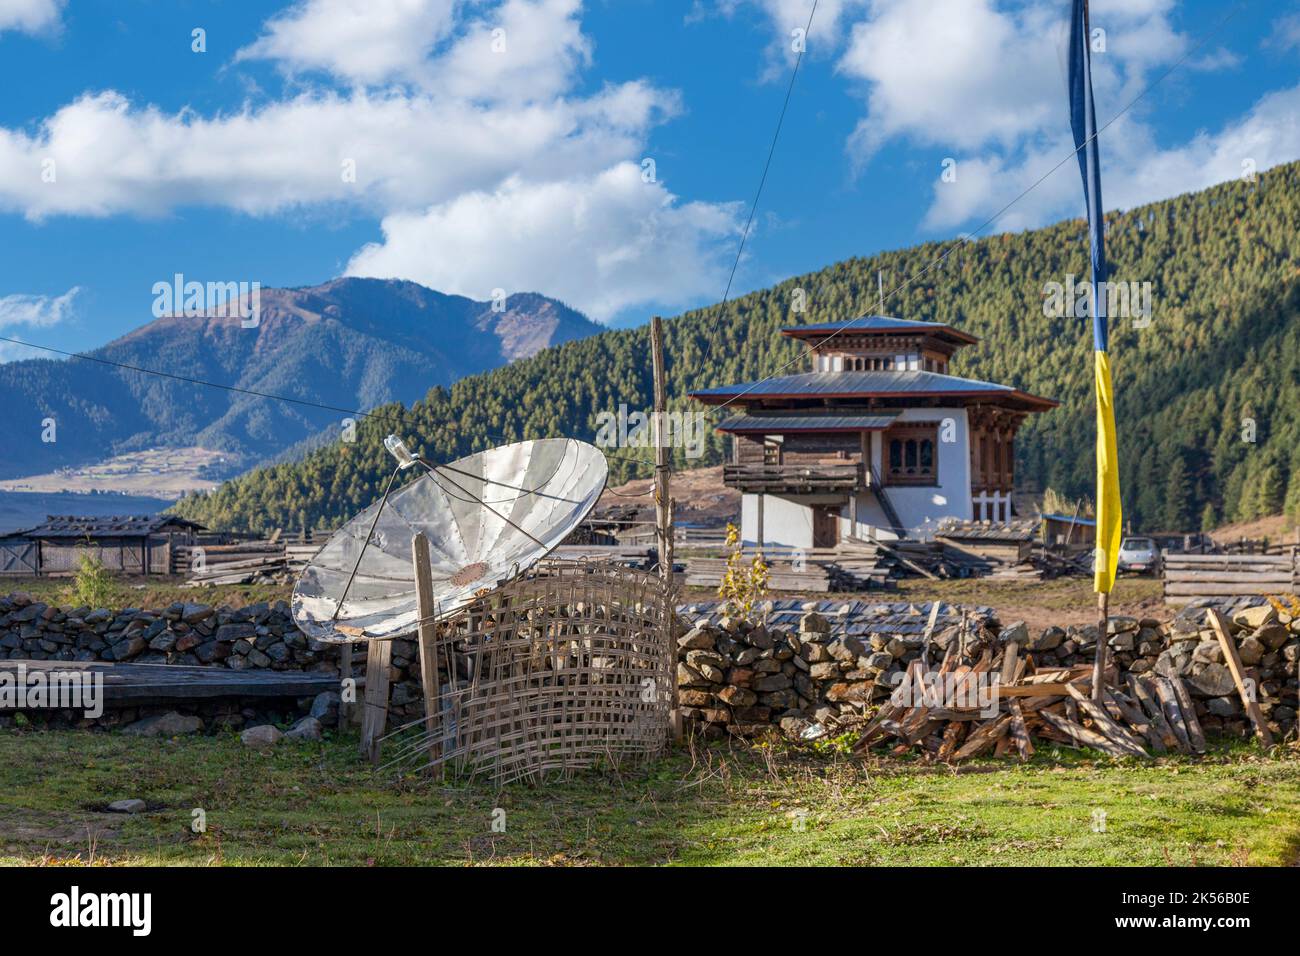 Phobjikha, Bhutan.  Satellite Dish in Foreground, Typical Middle-class Rural Farmhouse in Background,  Kikorthang Village. Stock Photo